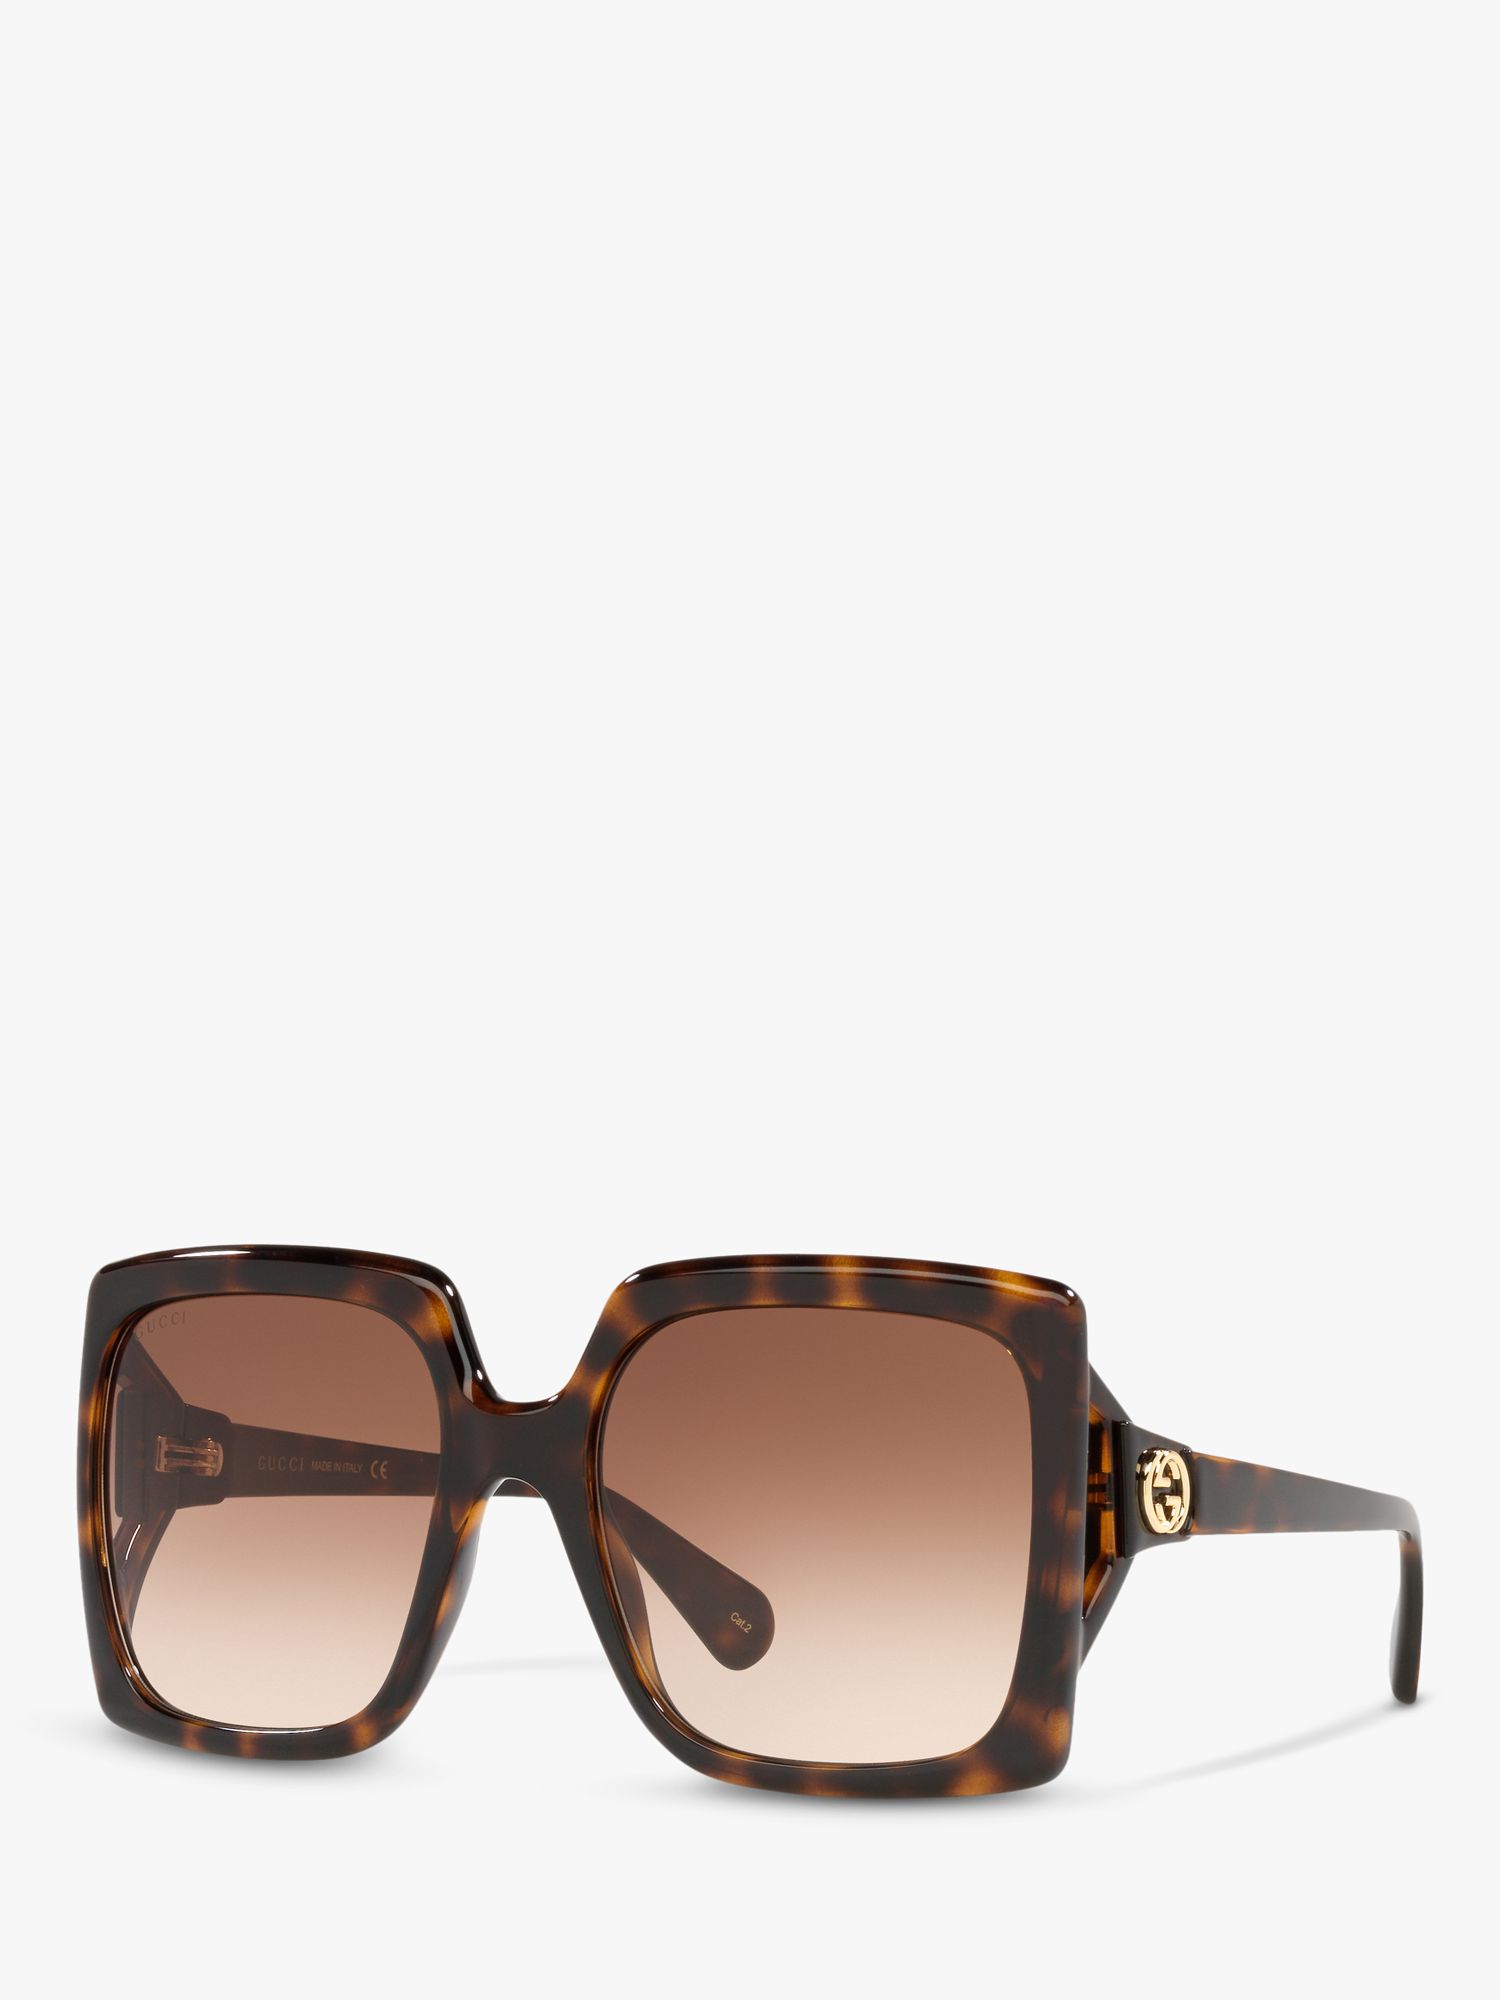 Gucci GG0876S Women's Chunky Square Sunglasses, Tortoise/Brown Gradient at  John Lewis & Partners